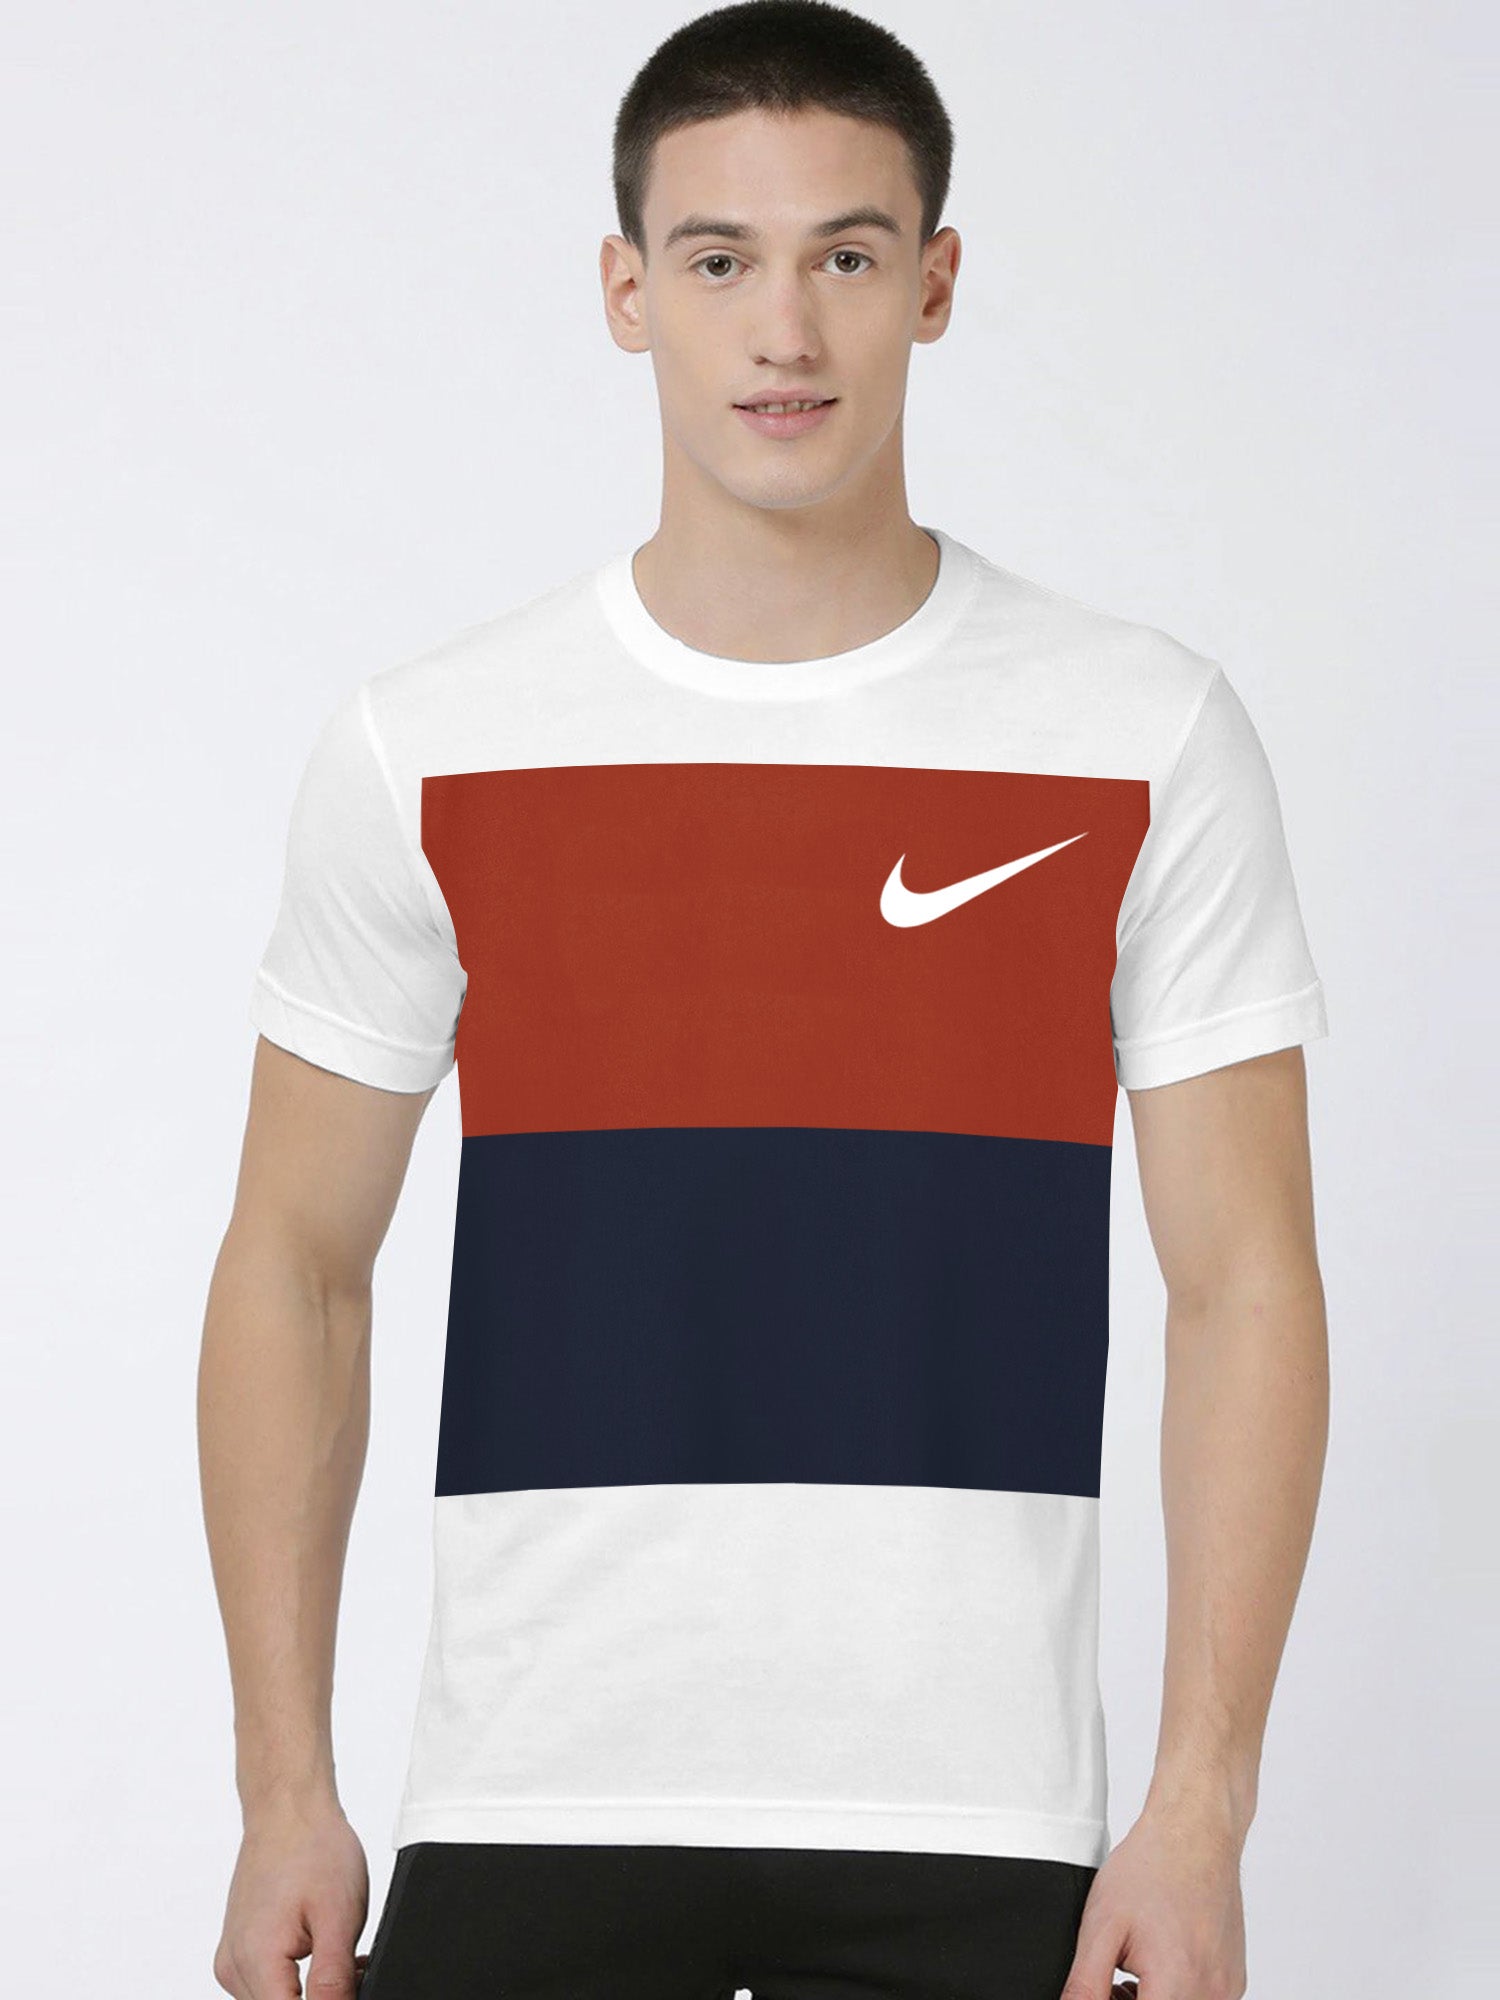 NK Crew Neck Single Jersey Tee Shirt For Men-White with Panels-SP2324